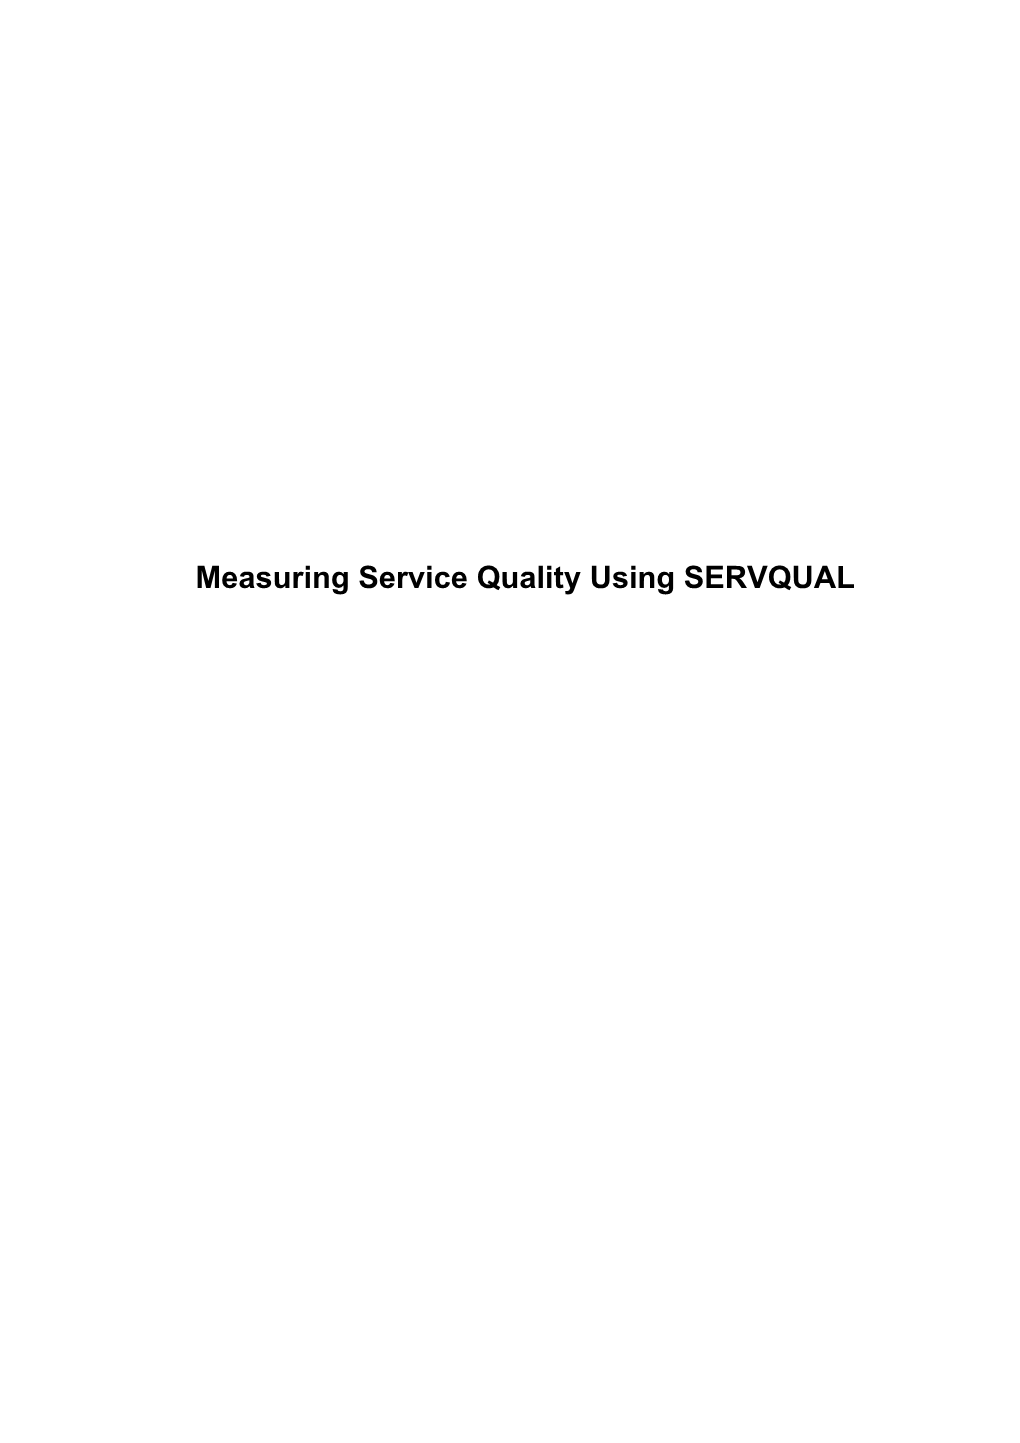 Case Study Measuring Service Quality Using SERVQUAL